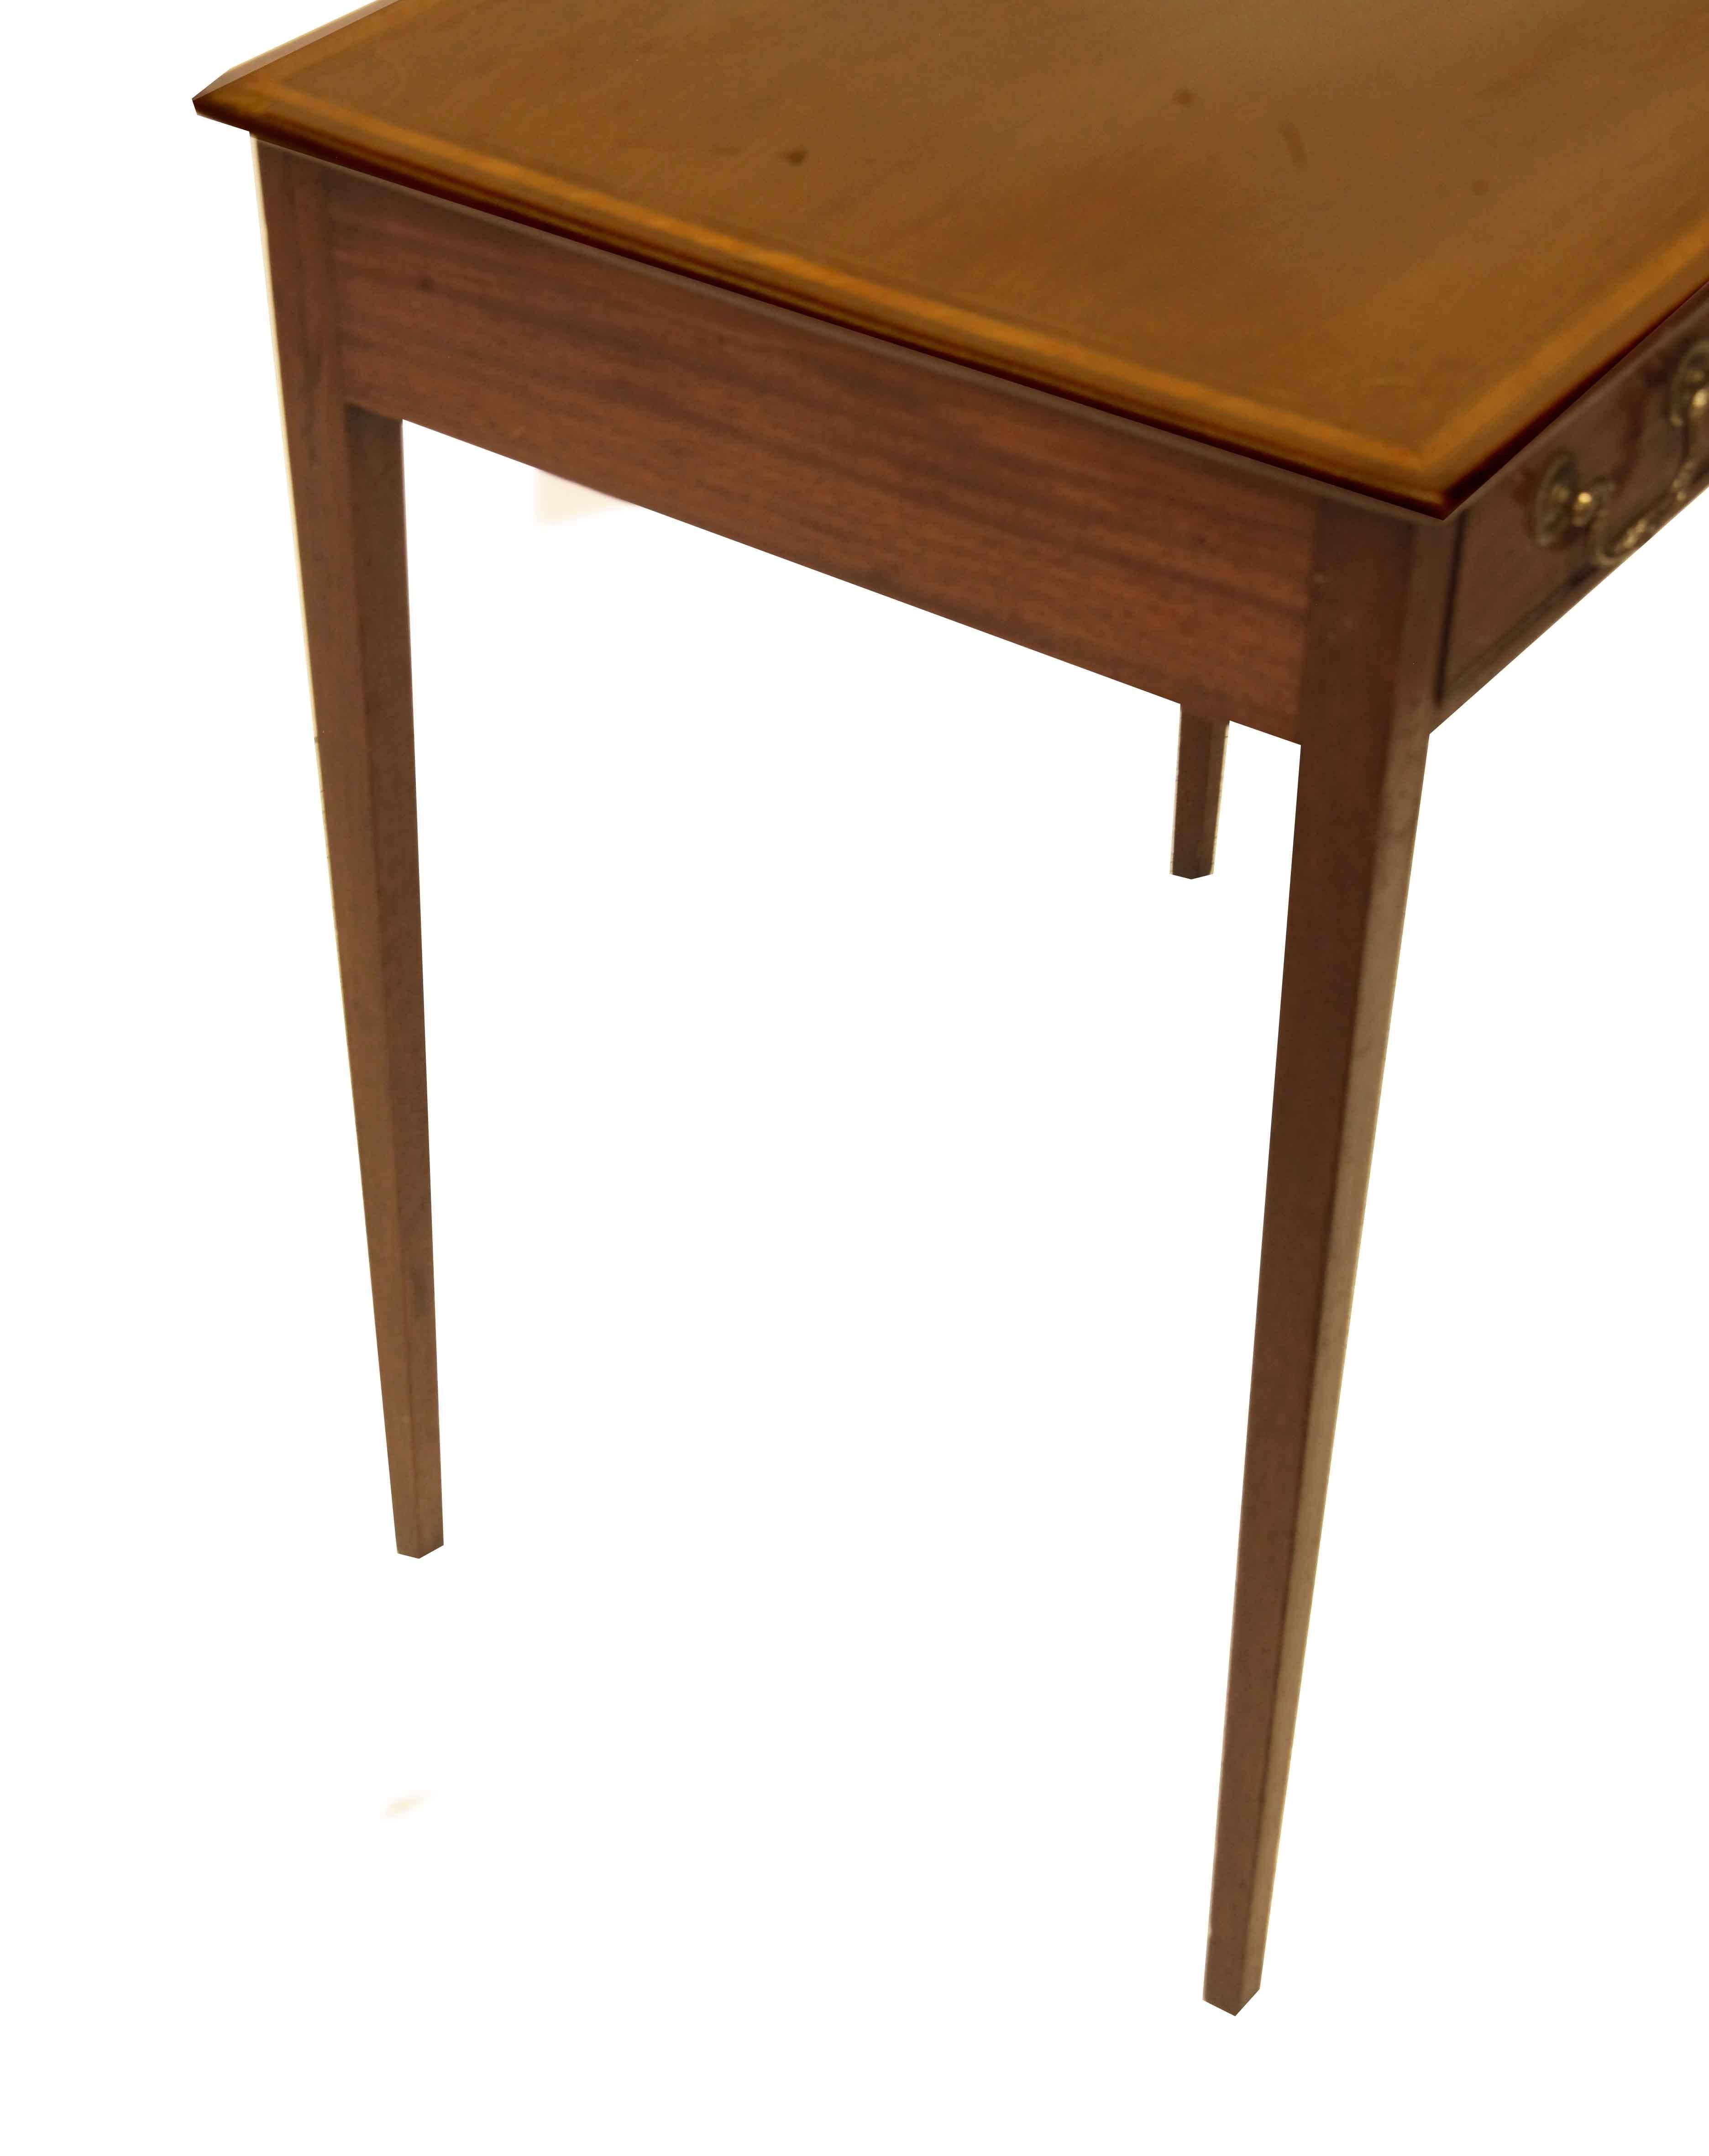 Hepplewhite inlaid one drawer table, the top features an inlaid conch shell in the center, the perimeter of the top is inlaid with a boxwood string and also a band comprised of boxwood and king wood. The single drawer has decorative swan neck pulls